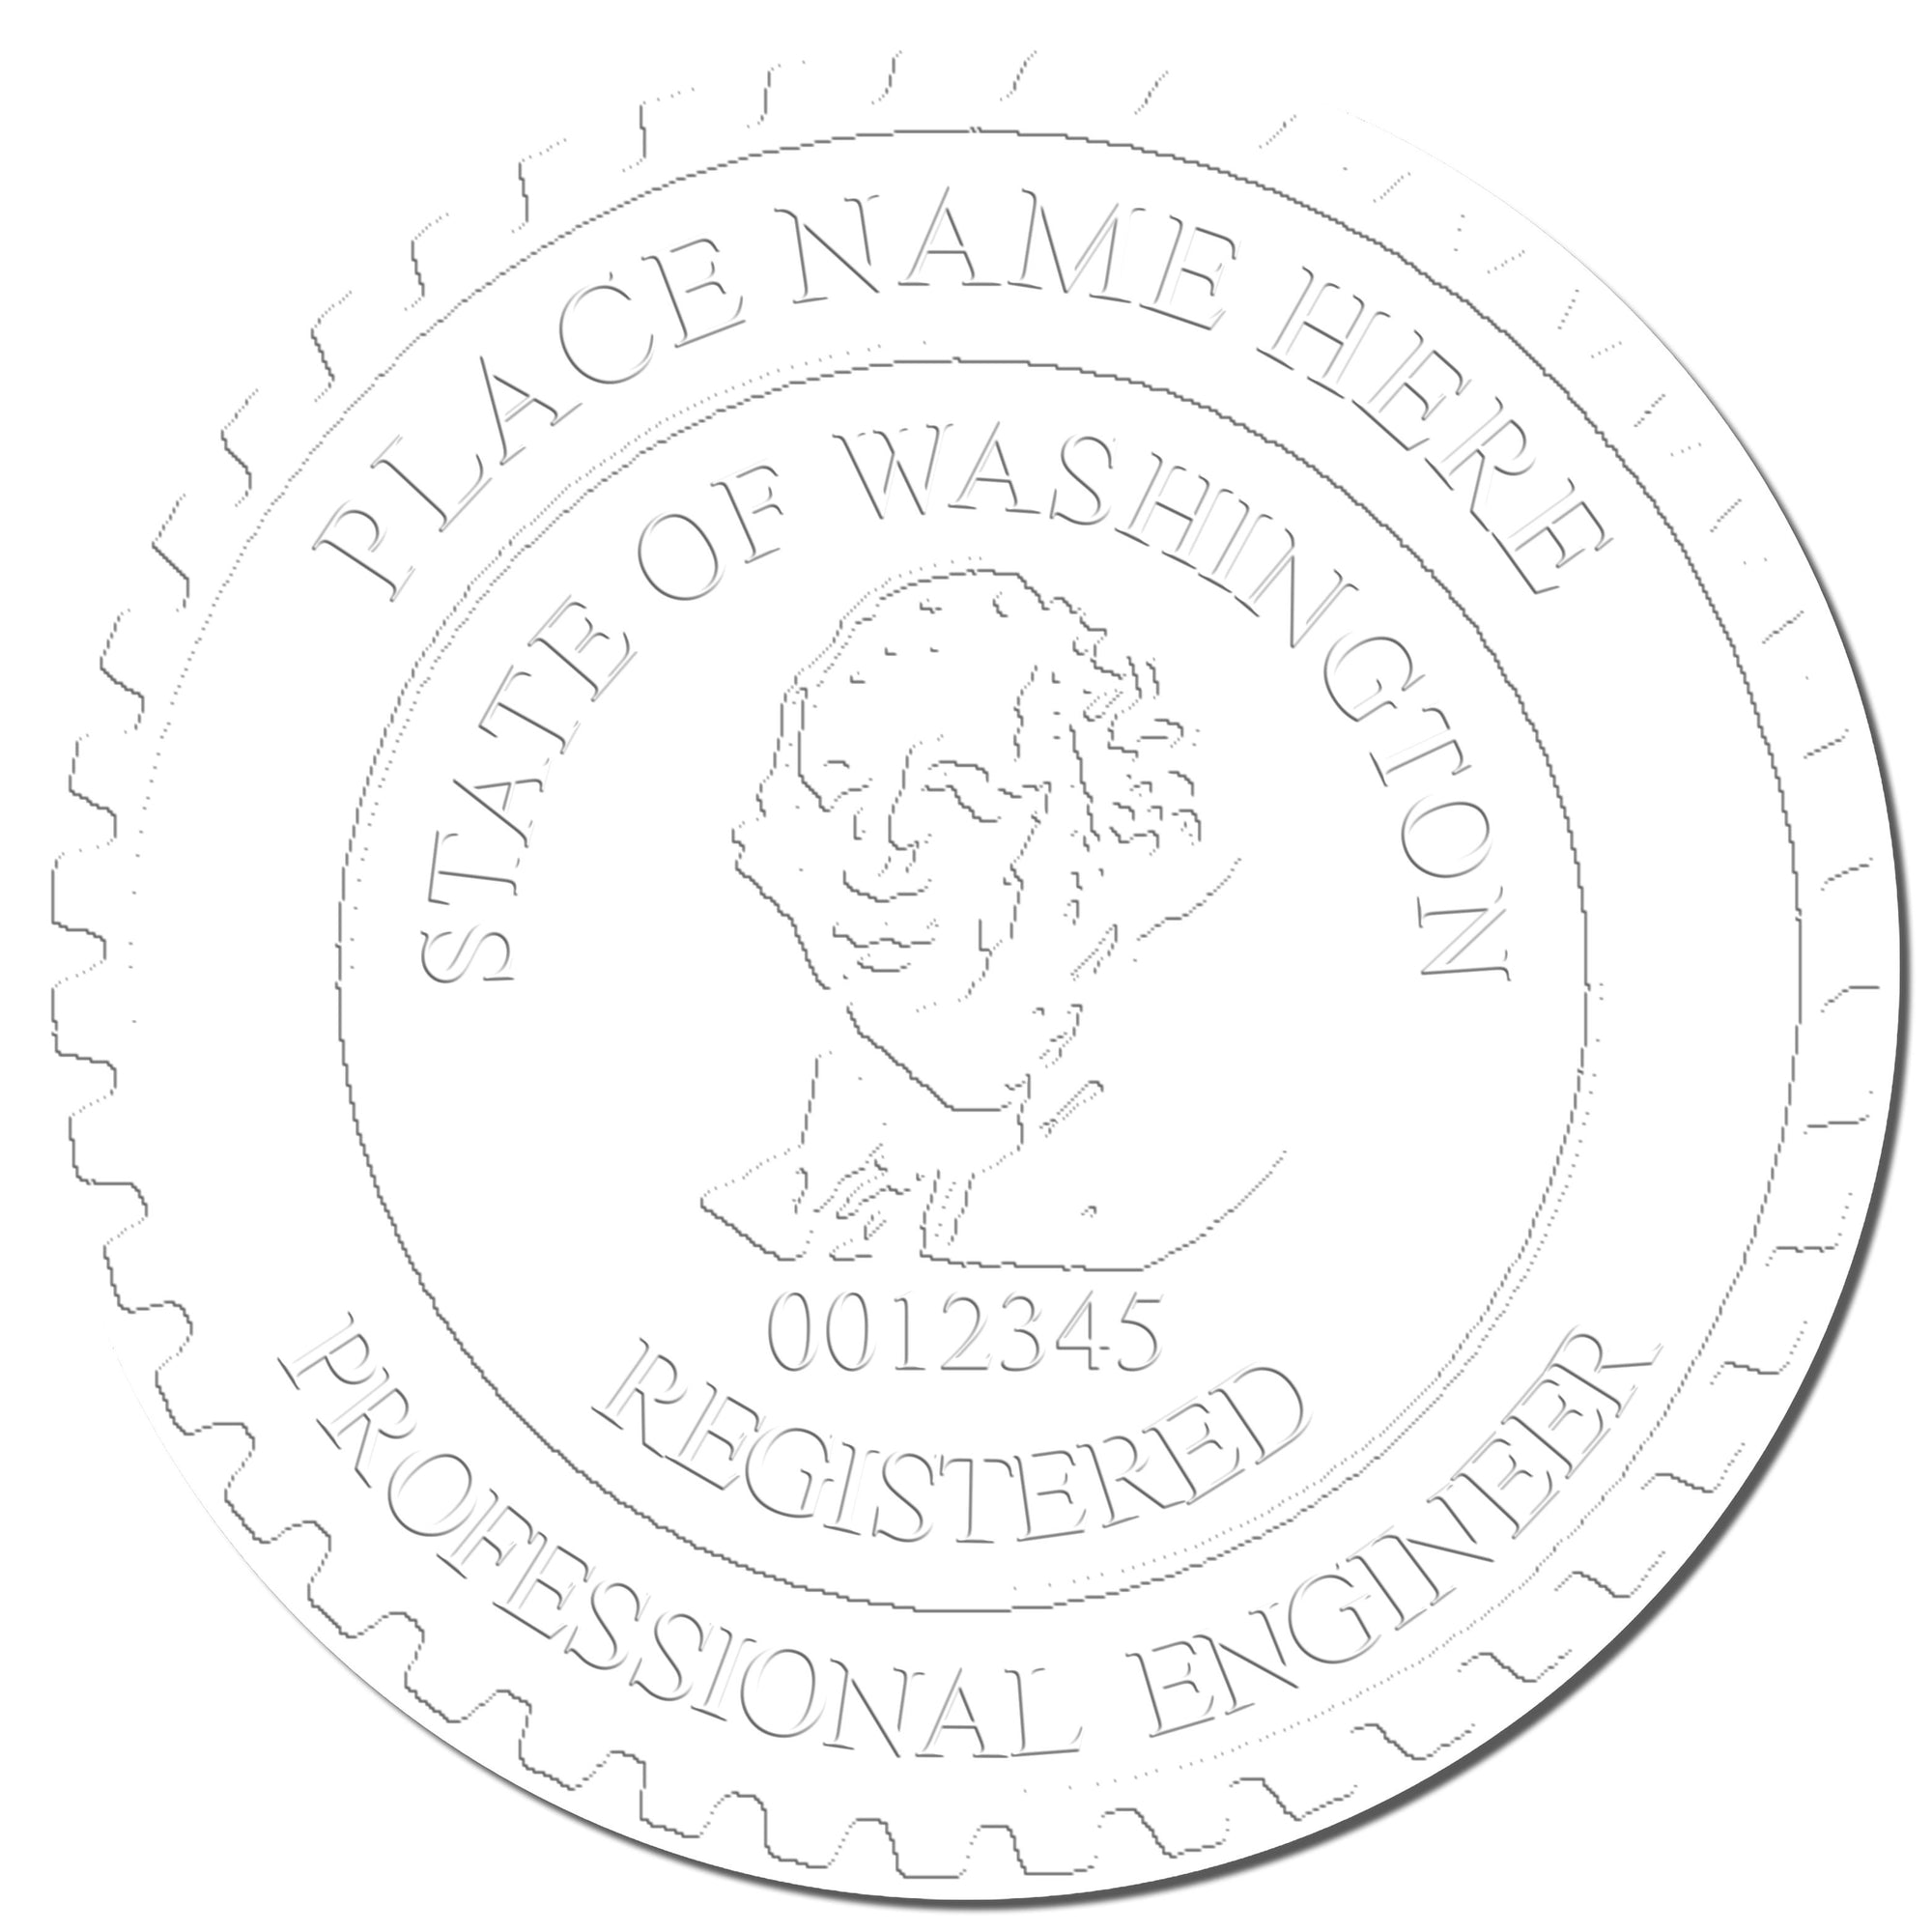 The main image for the Washington Engineer Desk Seal depicting a sample of the imprint and electronic files